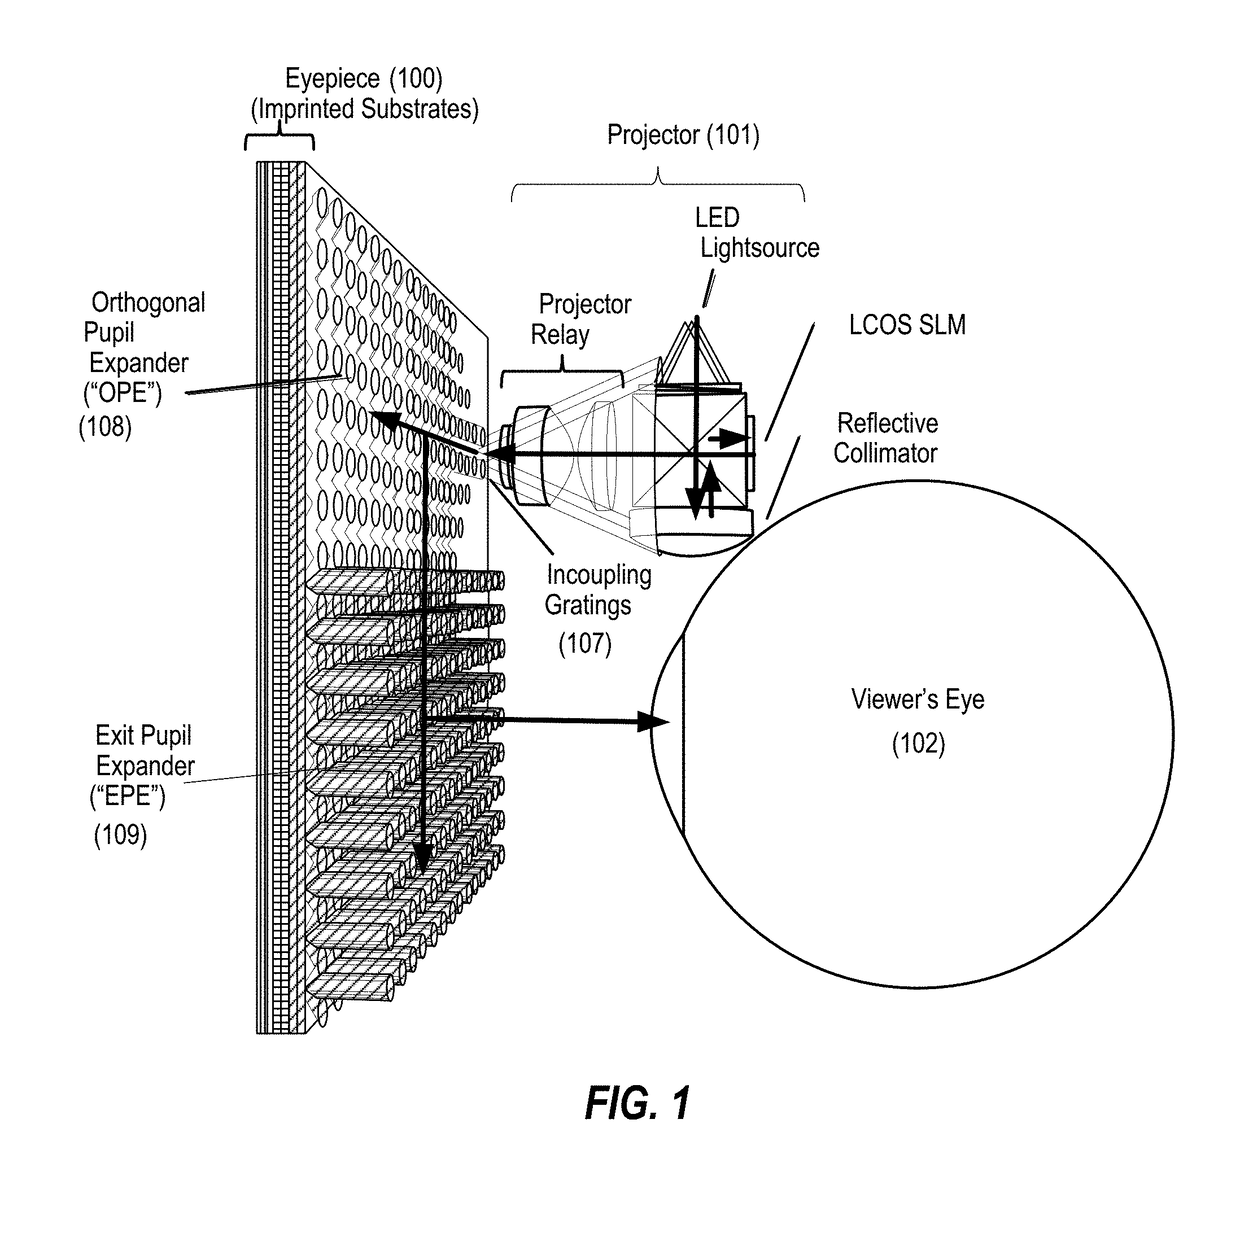 Projector architecture incorporating artifact mitigation